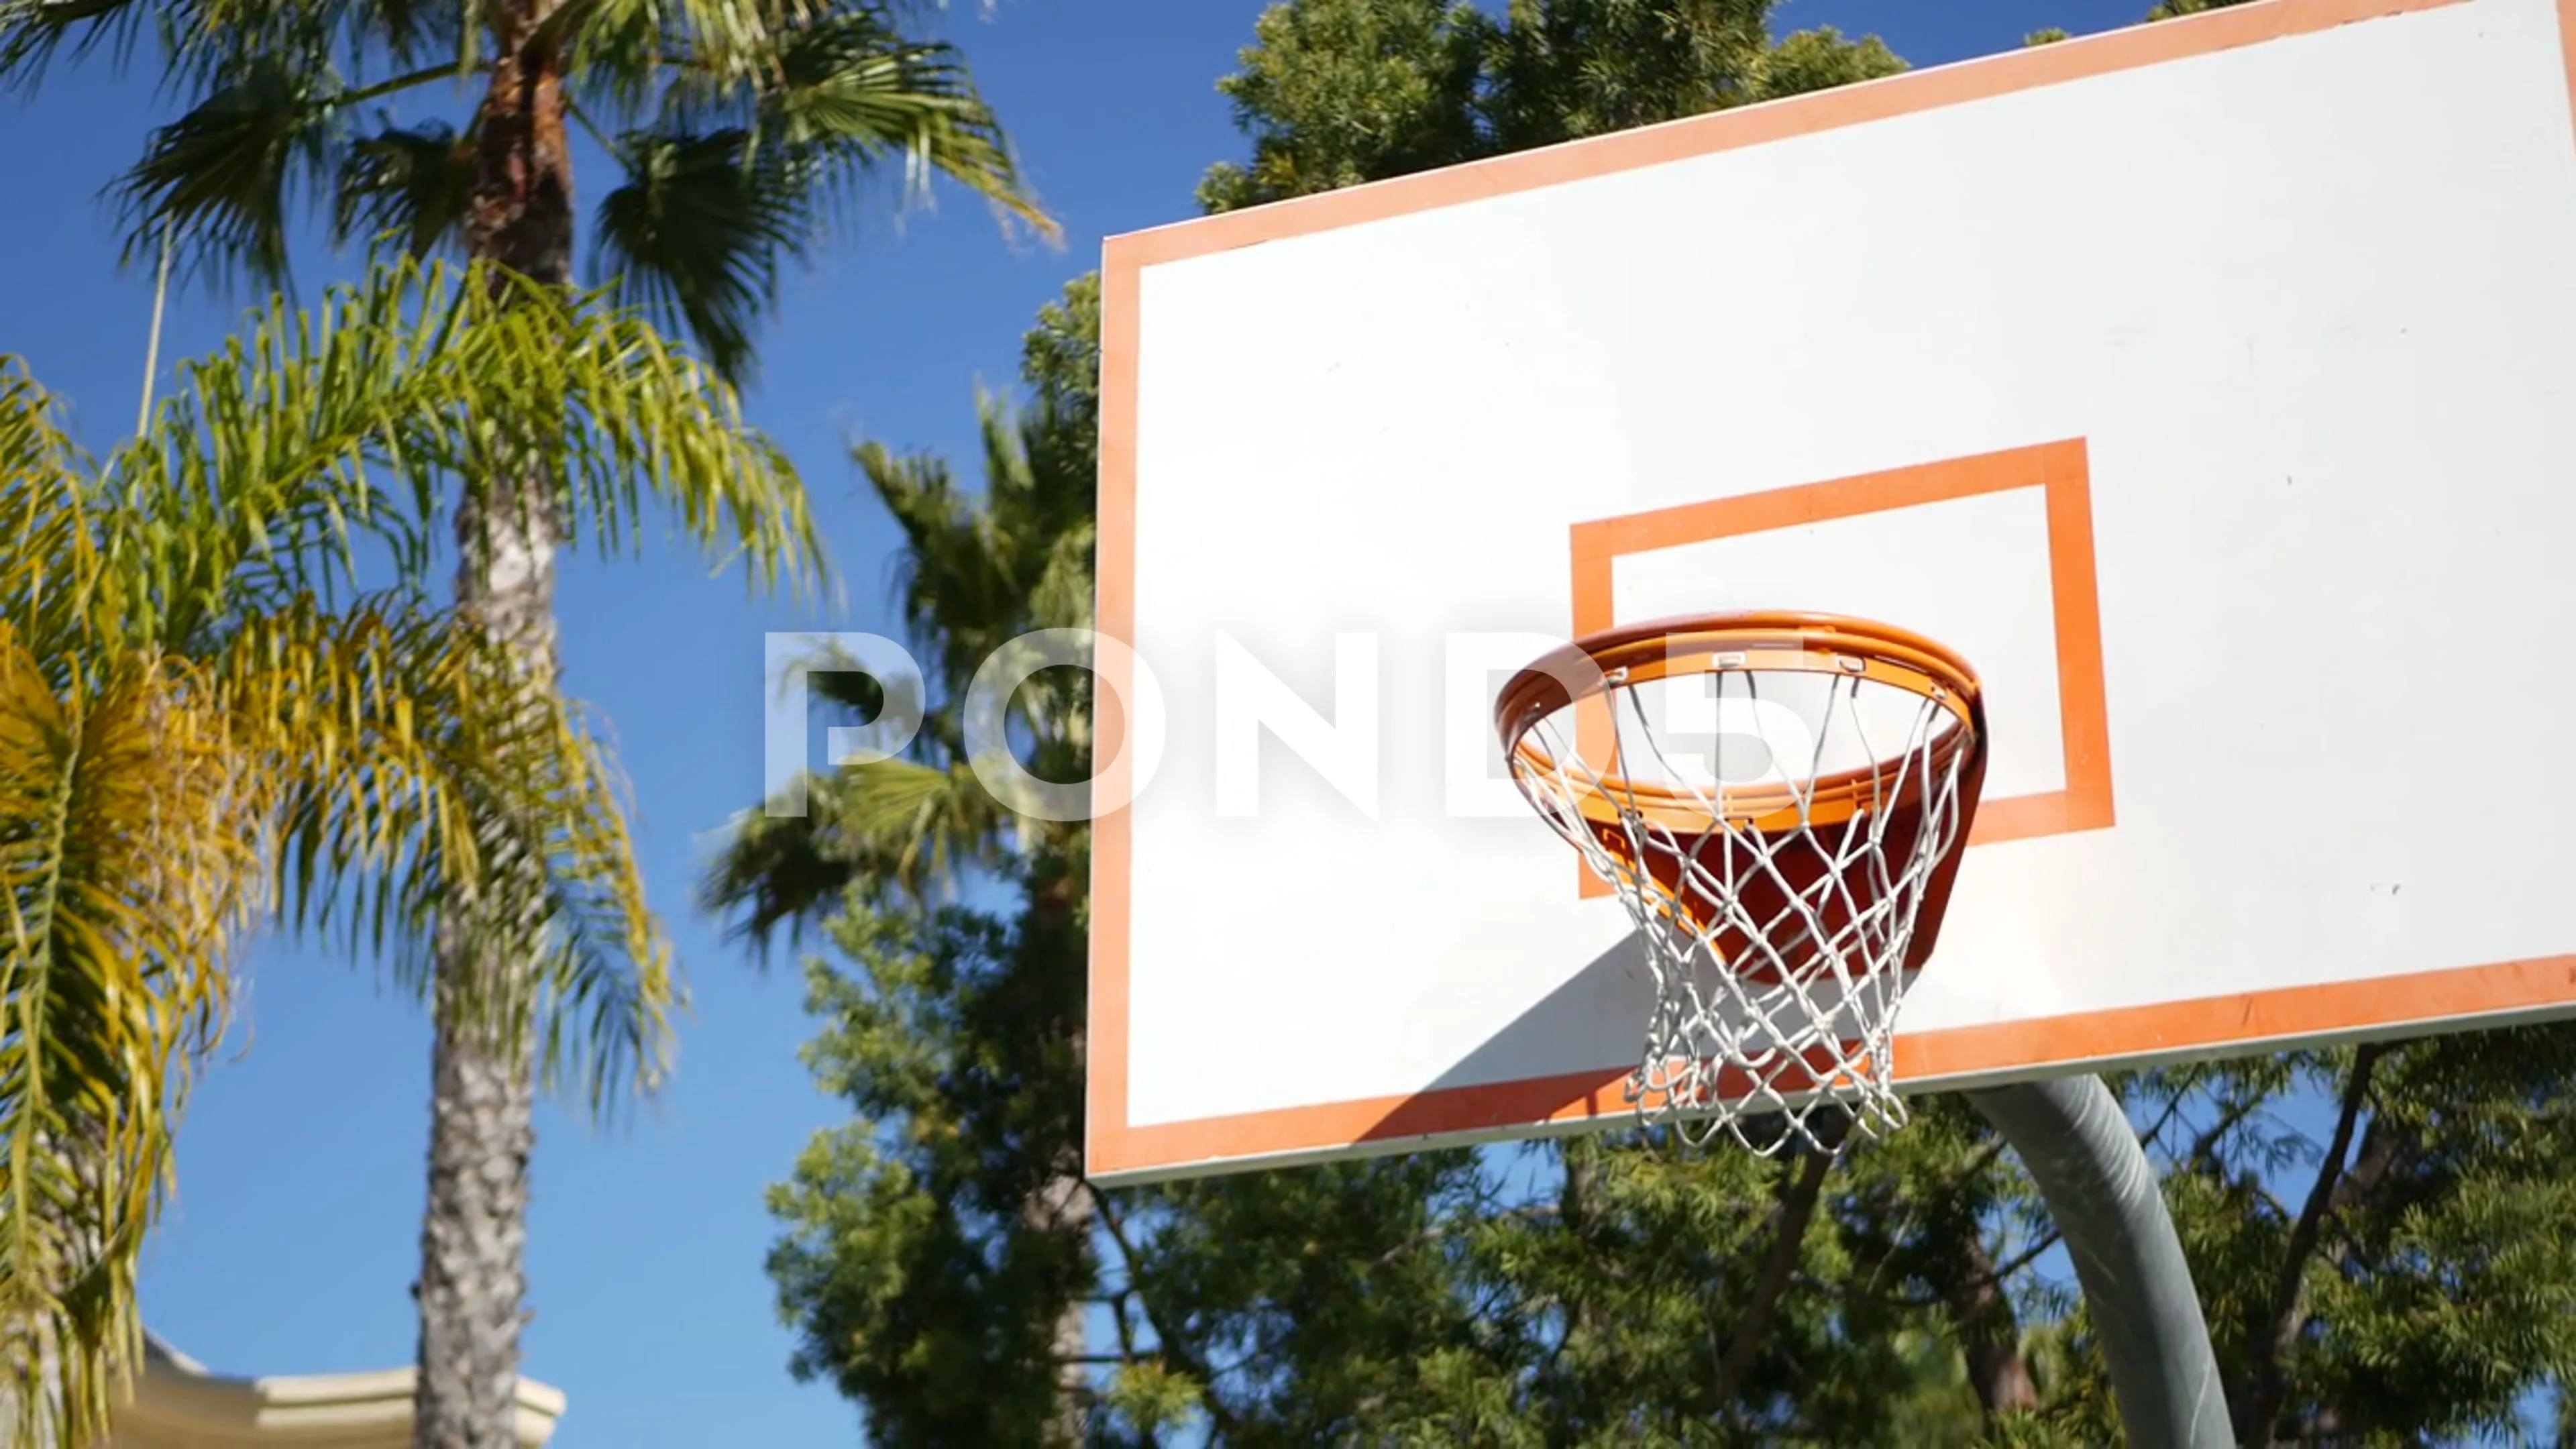 161 Basketball Transparent Background Stock Video Footage - 4K and HD Video  Clips